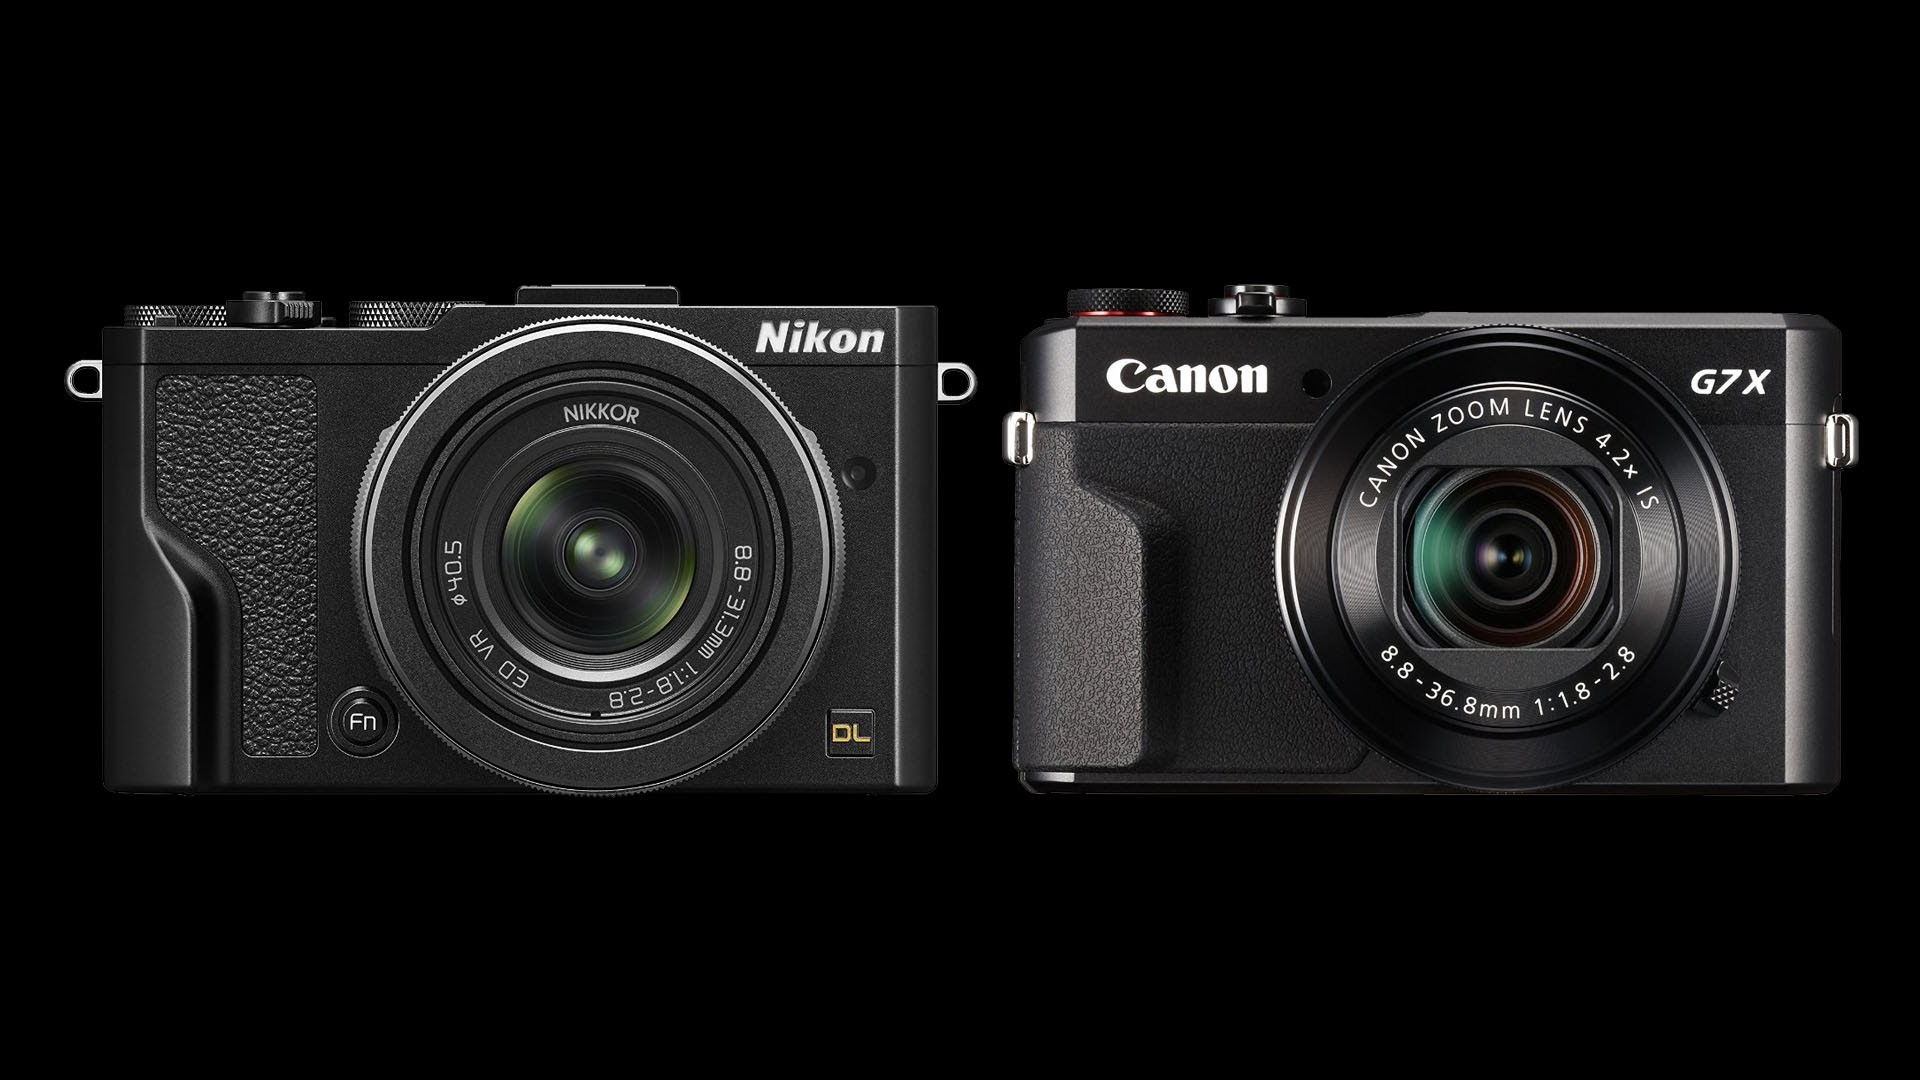 The Nikon DL 24-85, for example, will be taking on Canon G7X for photographers looking for fast lens. Source: Youtube- Artoftheimage